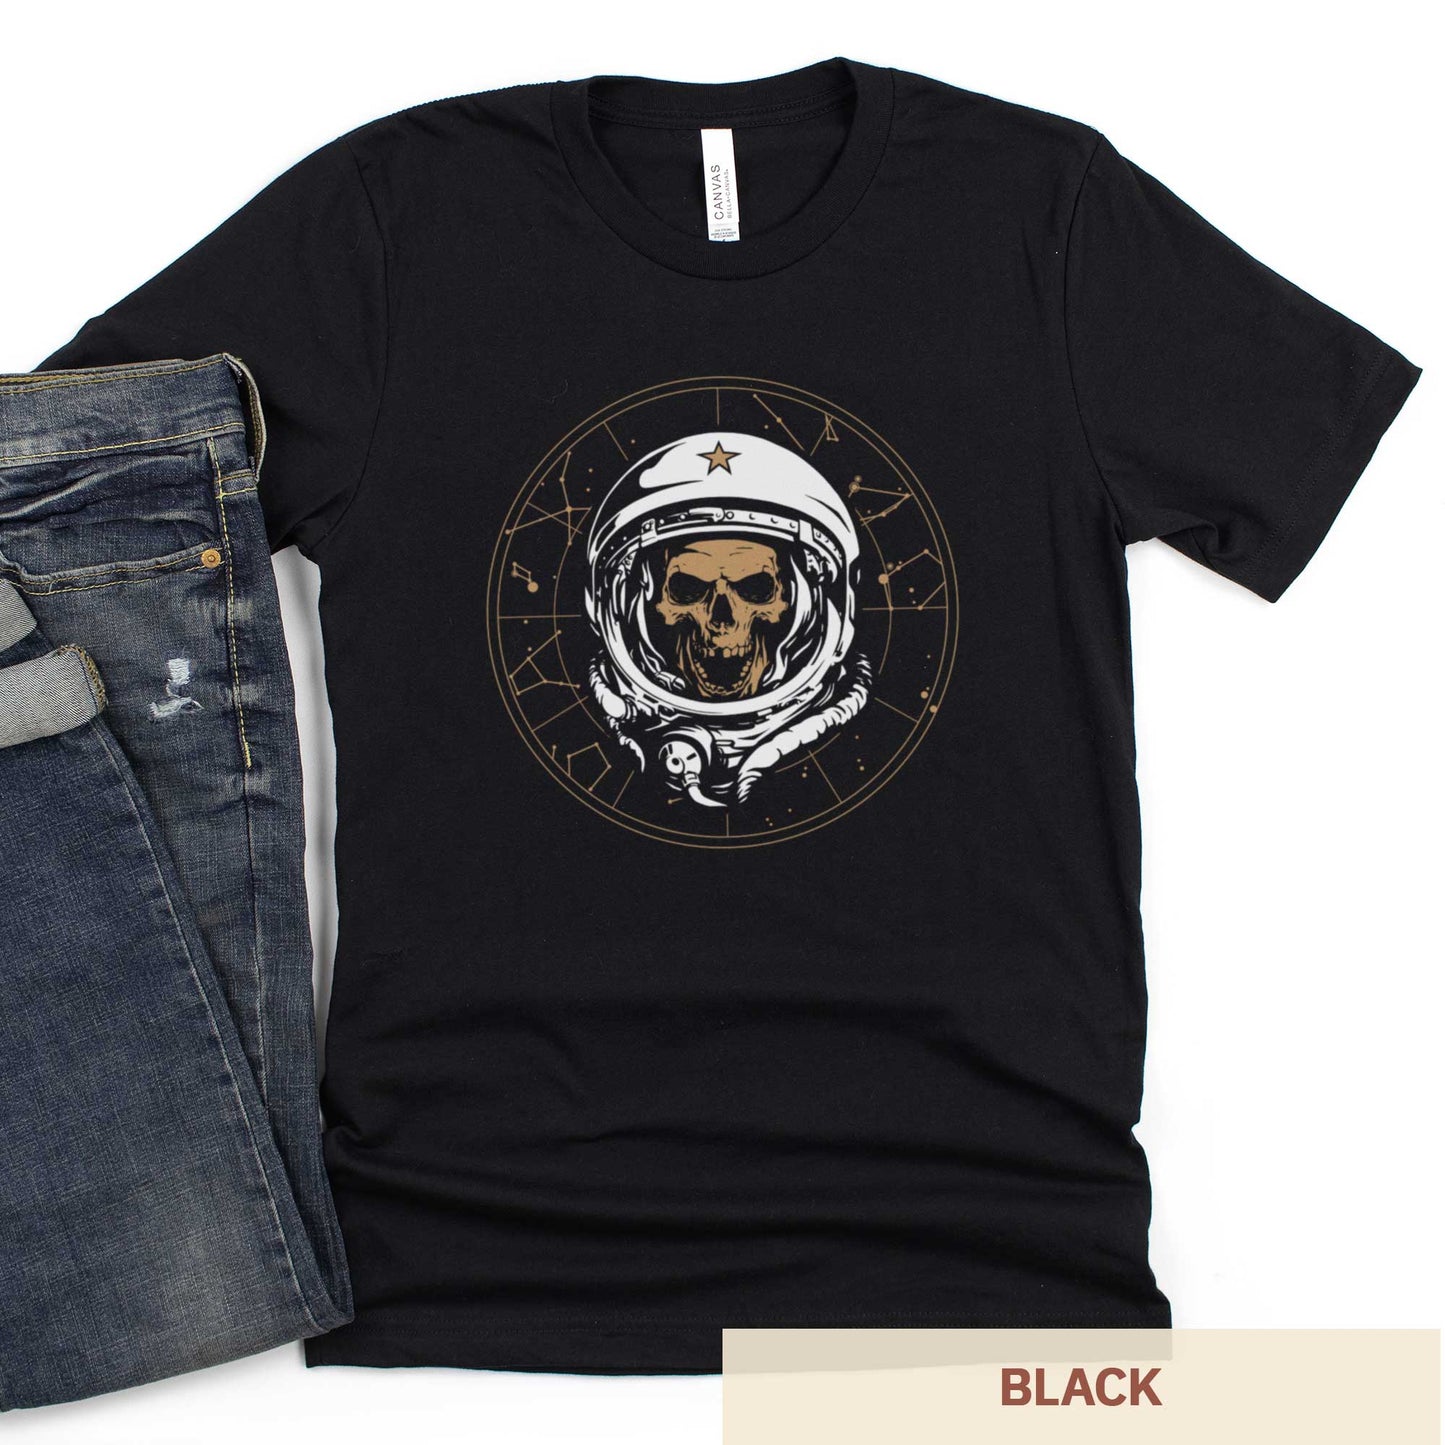 A black Bella Canvas t-shirt featuring a skull of astronaut breaking through the constellations in space.